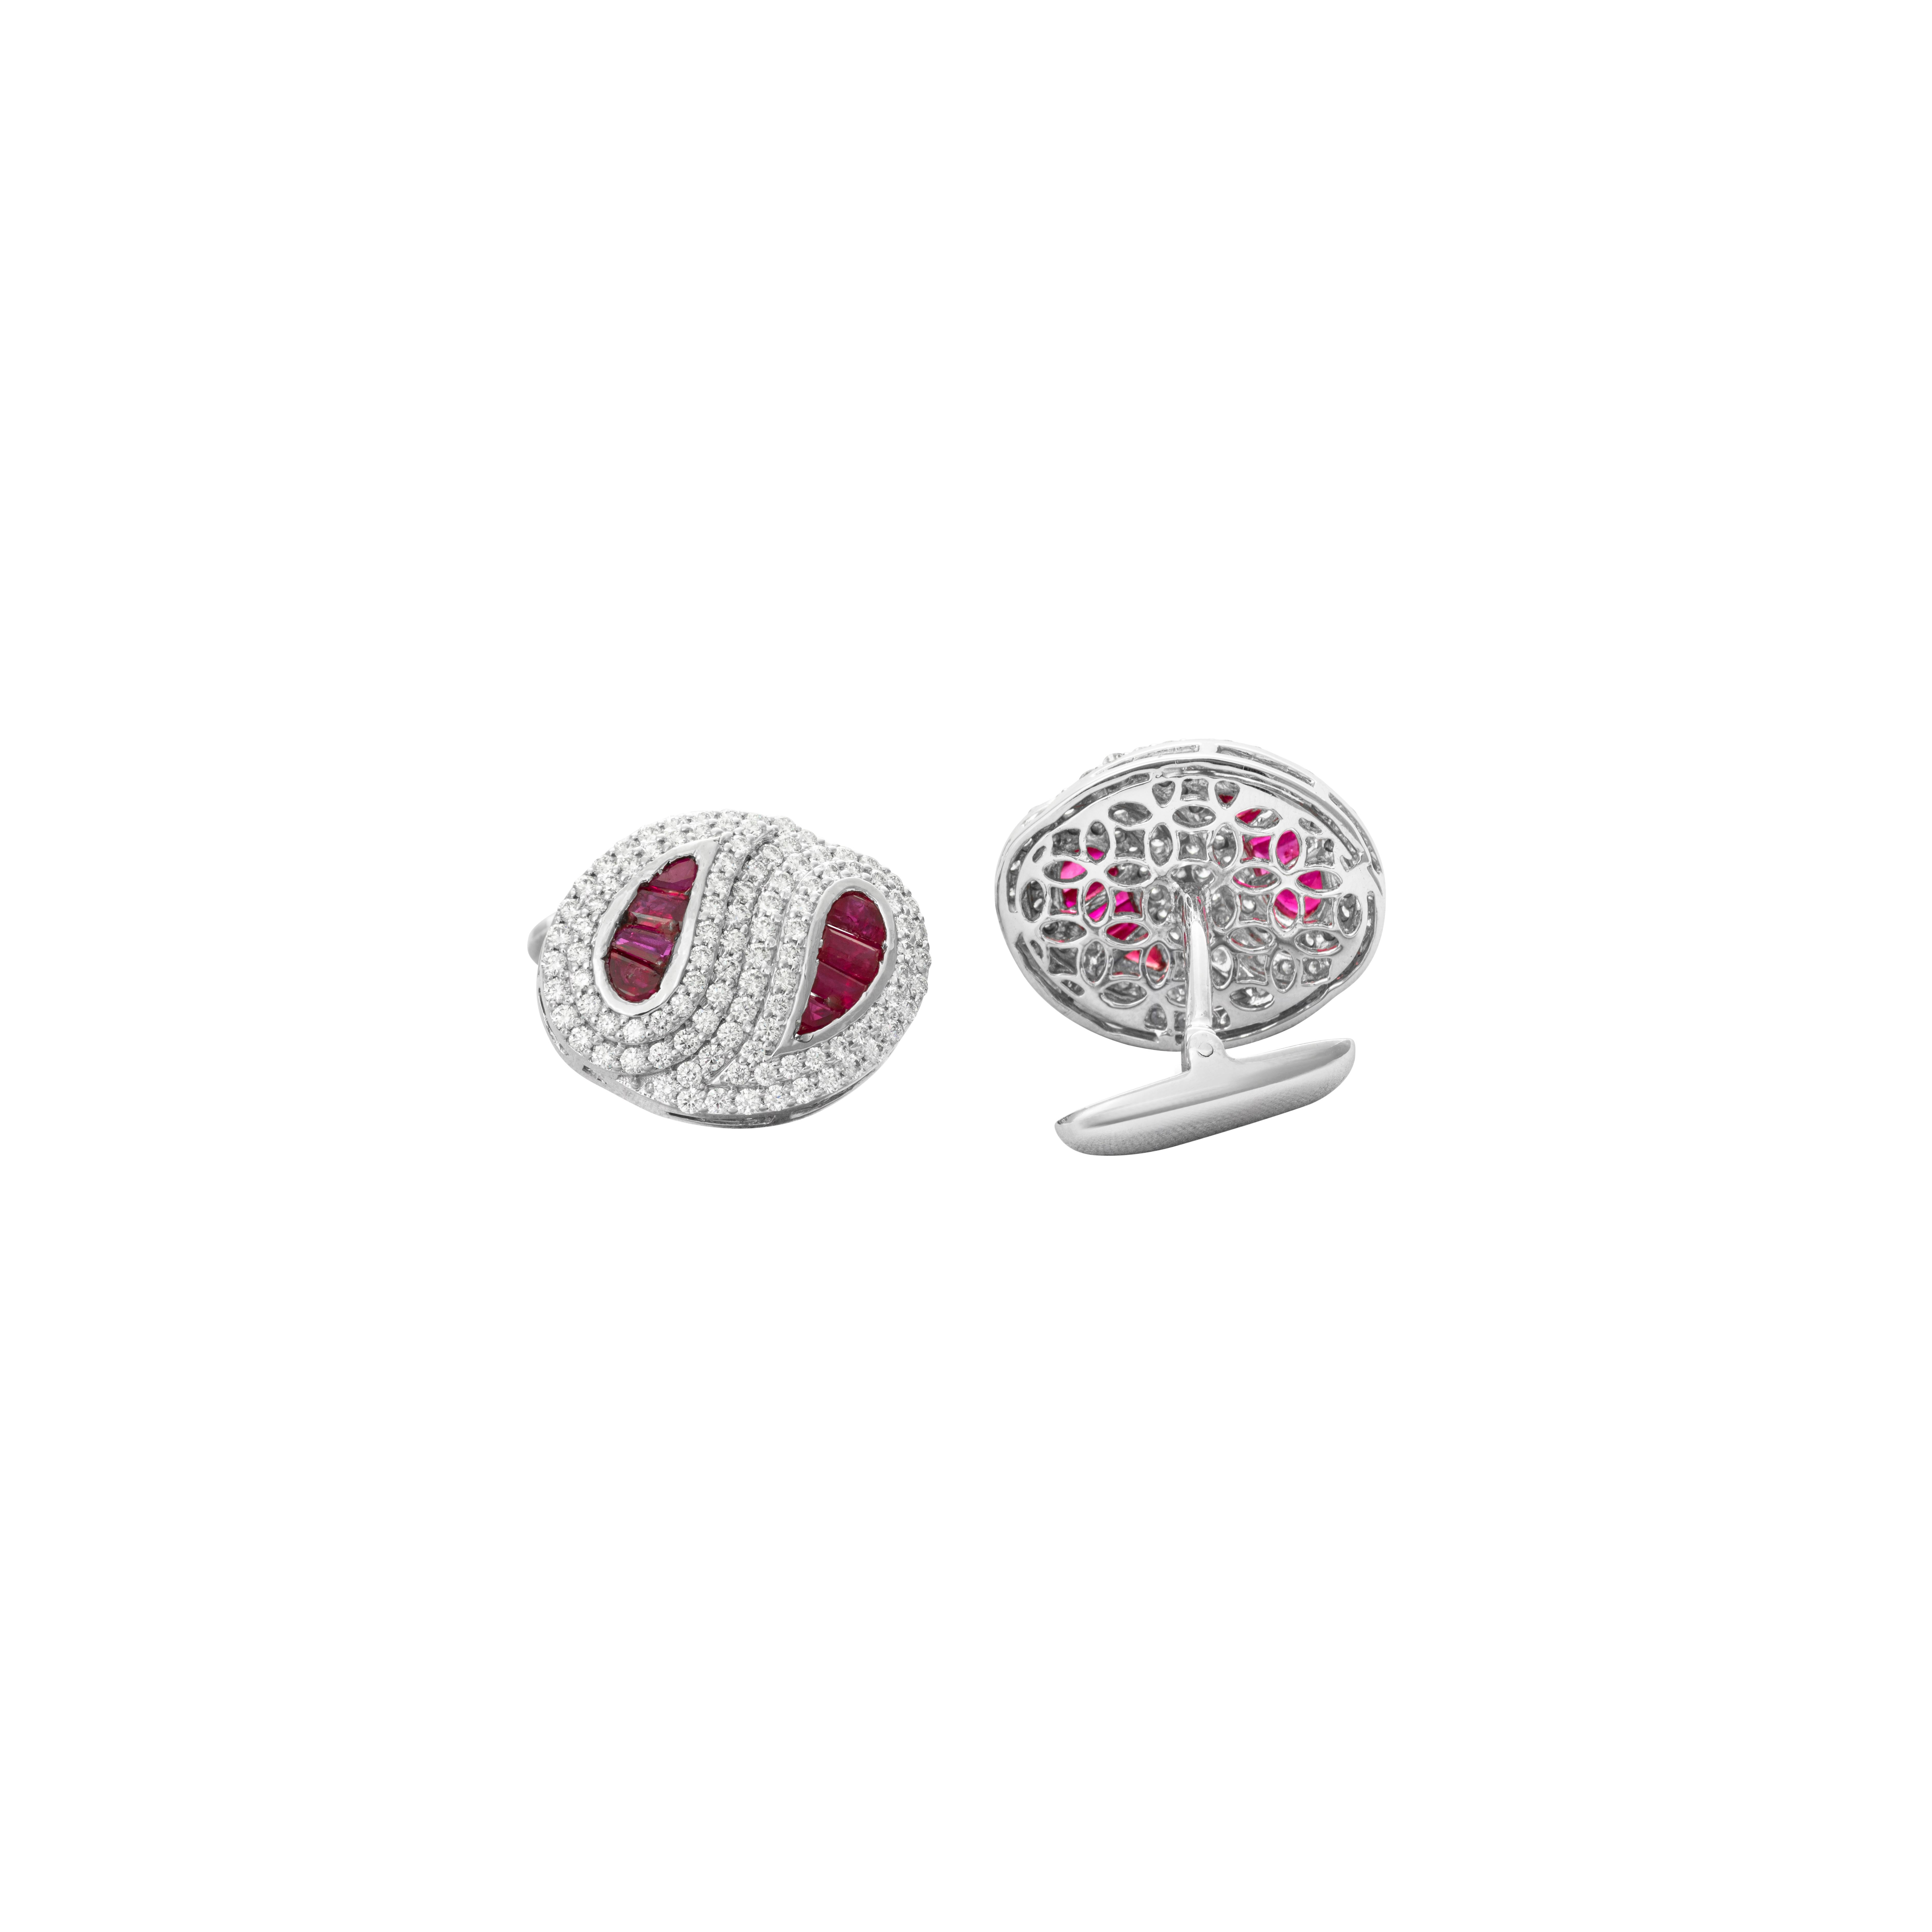 18 Karat White Gold Ruby Diamond Cufflinks

Classy cufflinks set in 18 Karat white gold, studded with white diamonds (VVS-VS Purity) and gorgeous rubies, crafted for the discerning gentleman. Perfect for formal & evening wear.

18 Karat Gold -